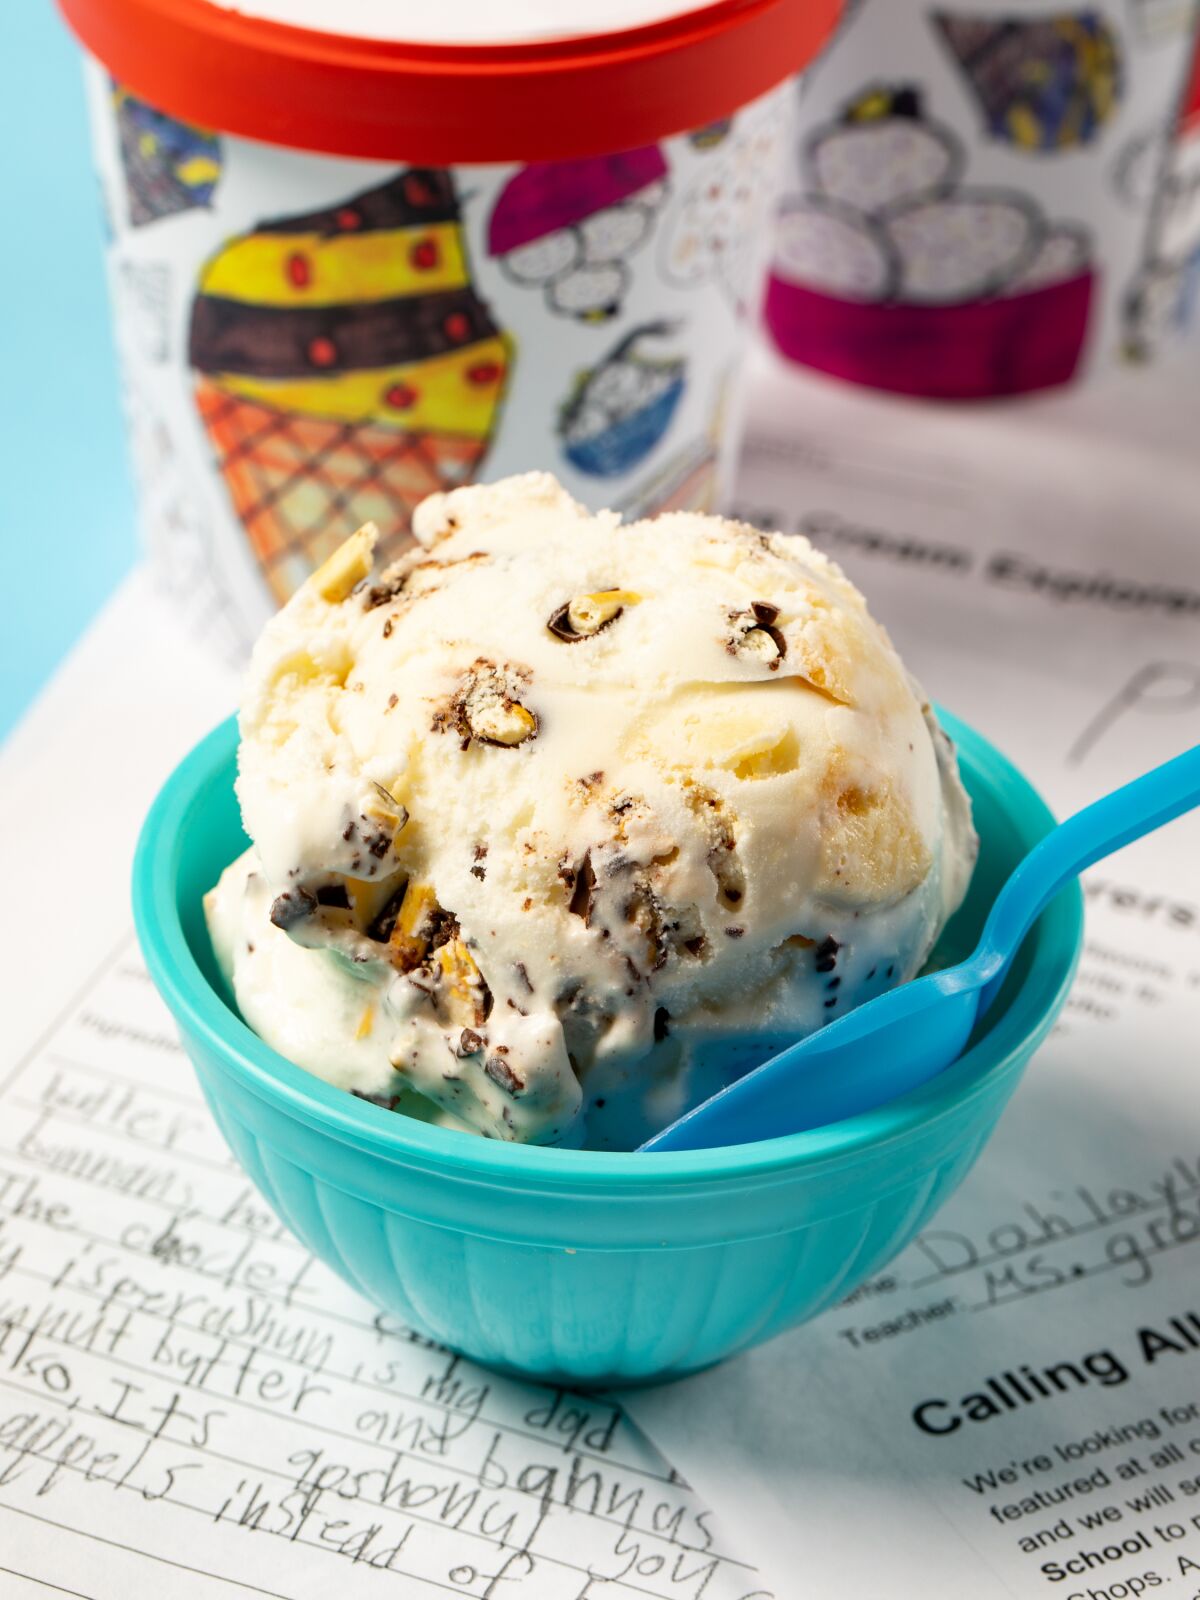 Yan-chan Swirl, one of five featured flavors created by fourth-graders at Washington Elementary School in Little Italy, for the gourmet ice cream chain Salt & Straw. This flavor is made with Japanese-made Pocky cookie sticks.